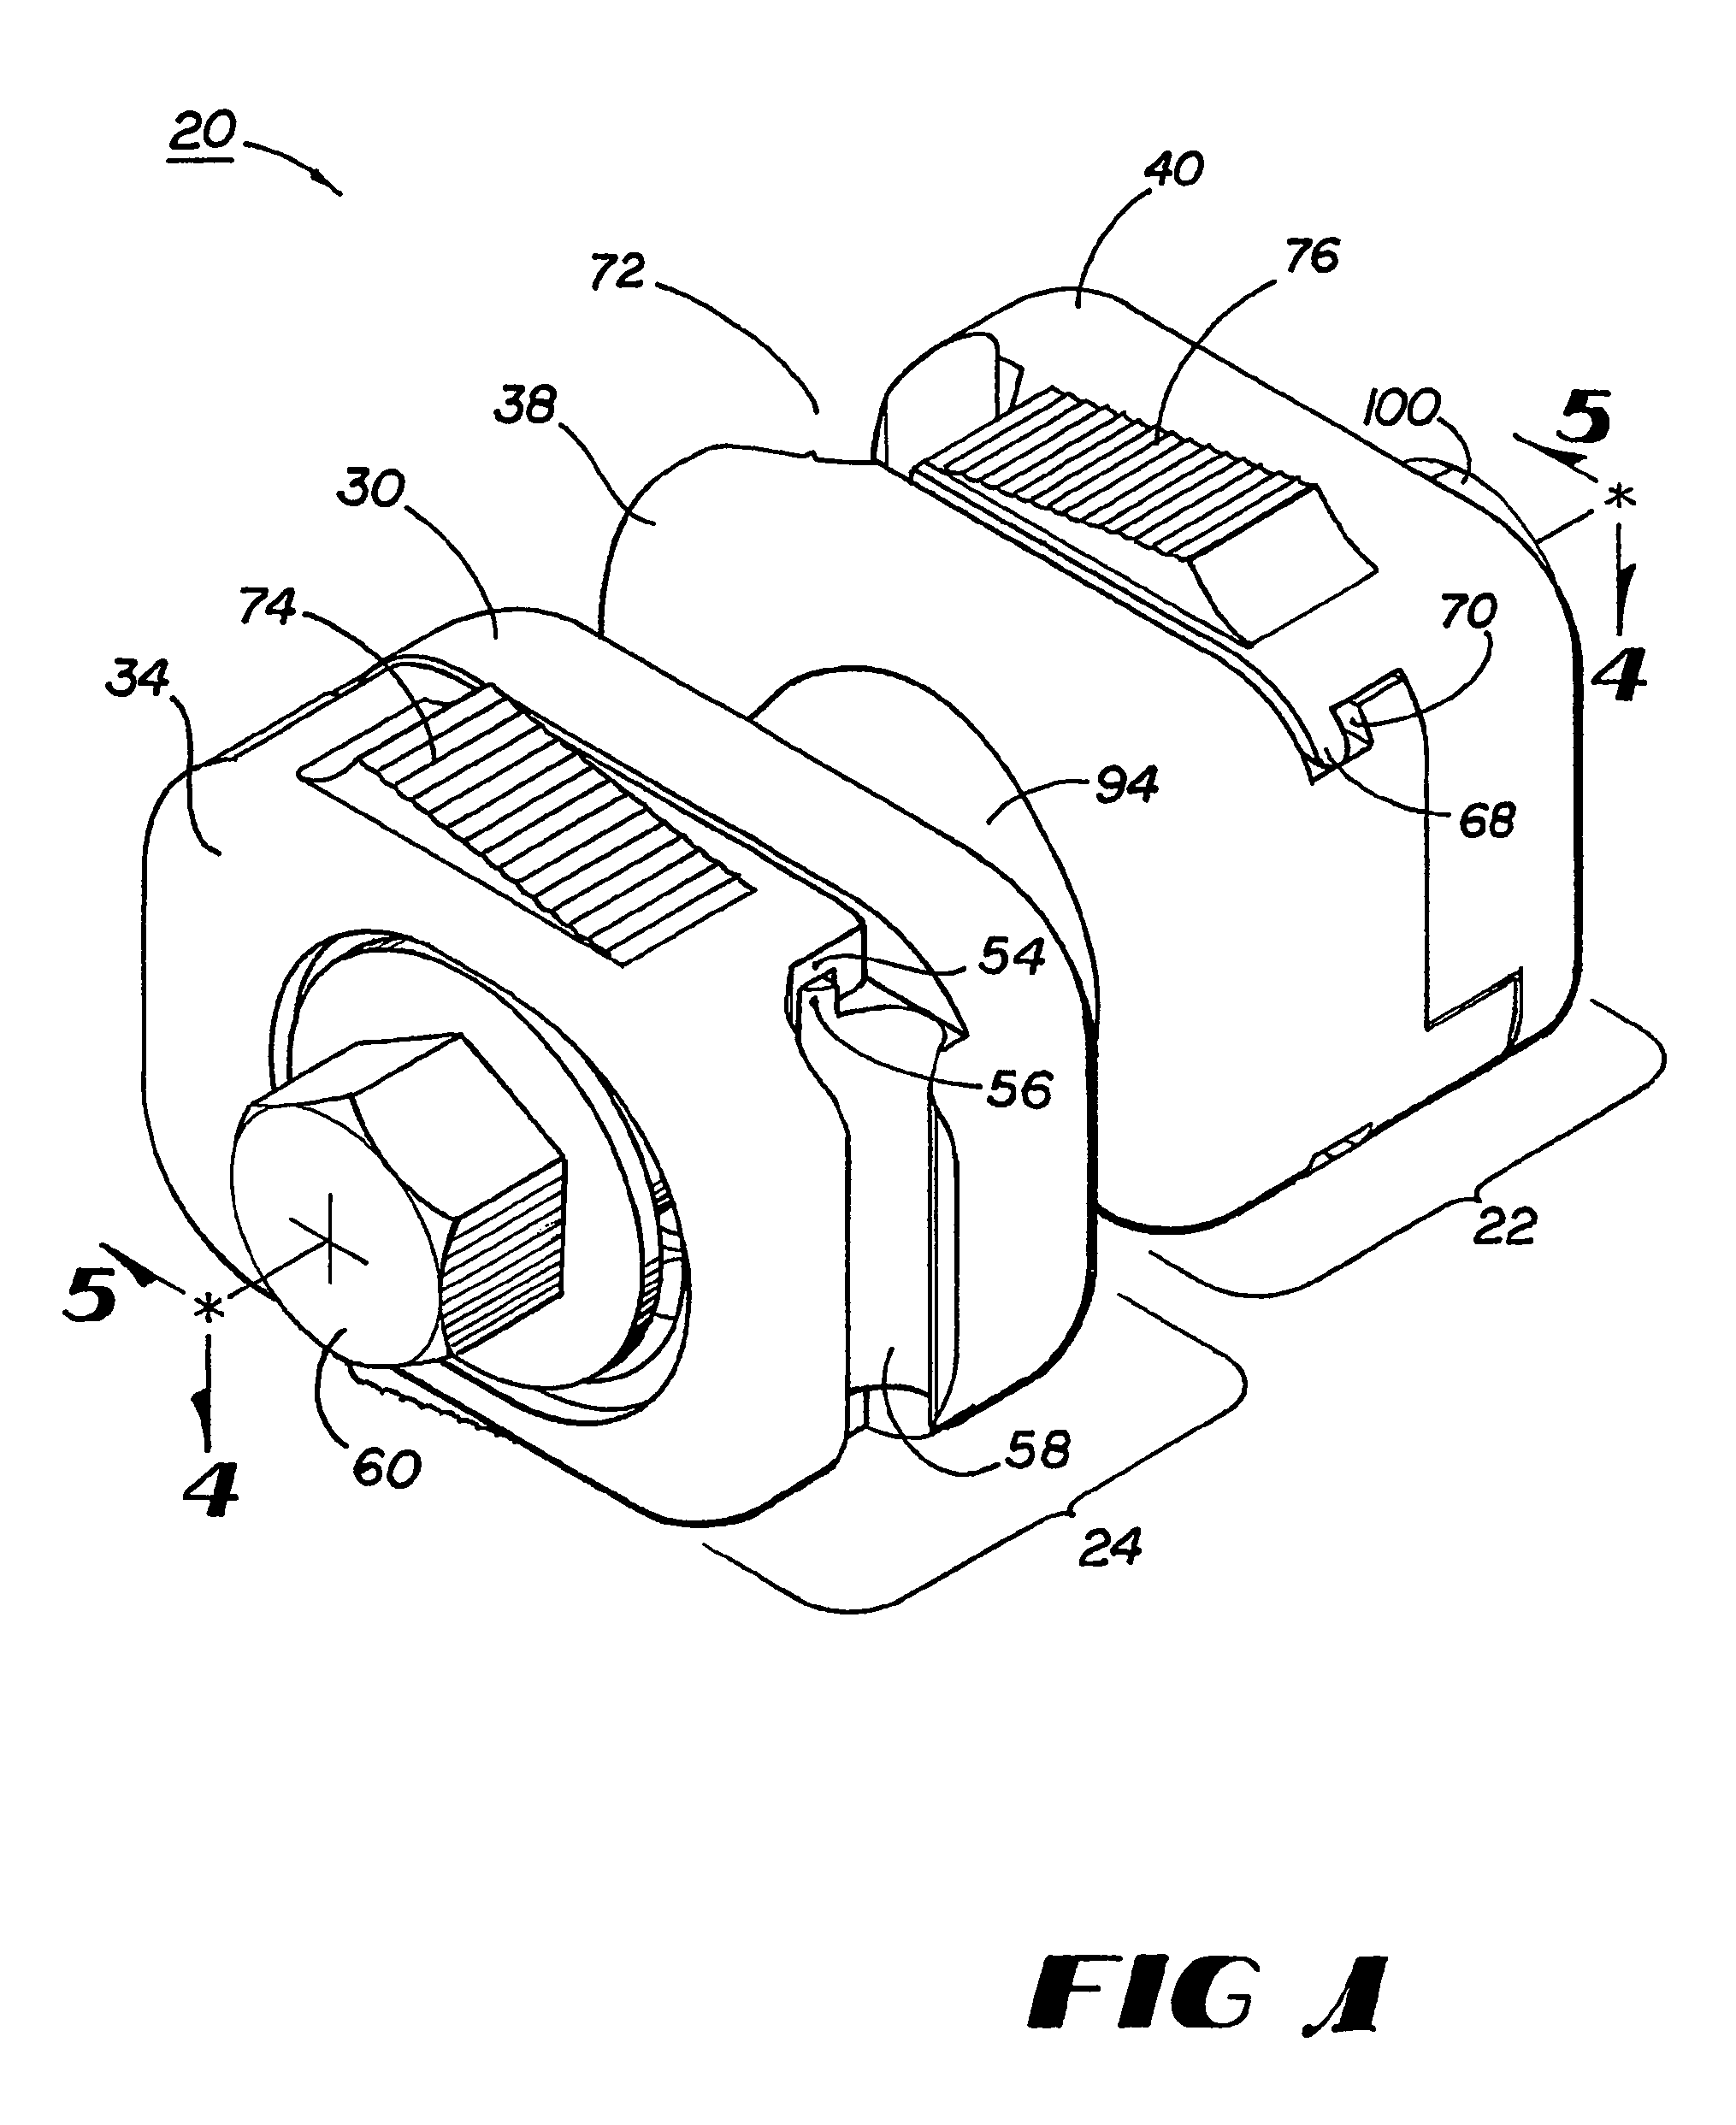 Device and methods for placing external fixation elements